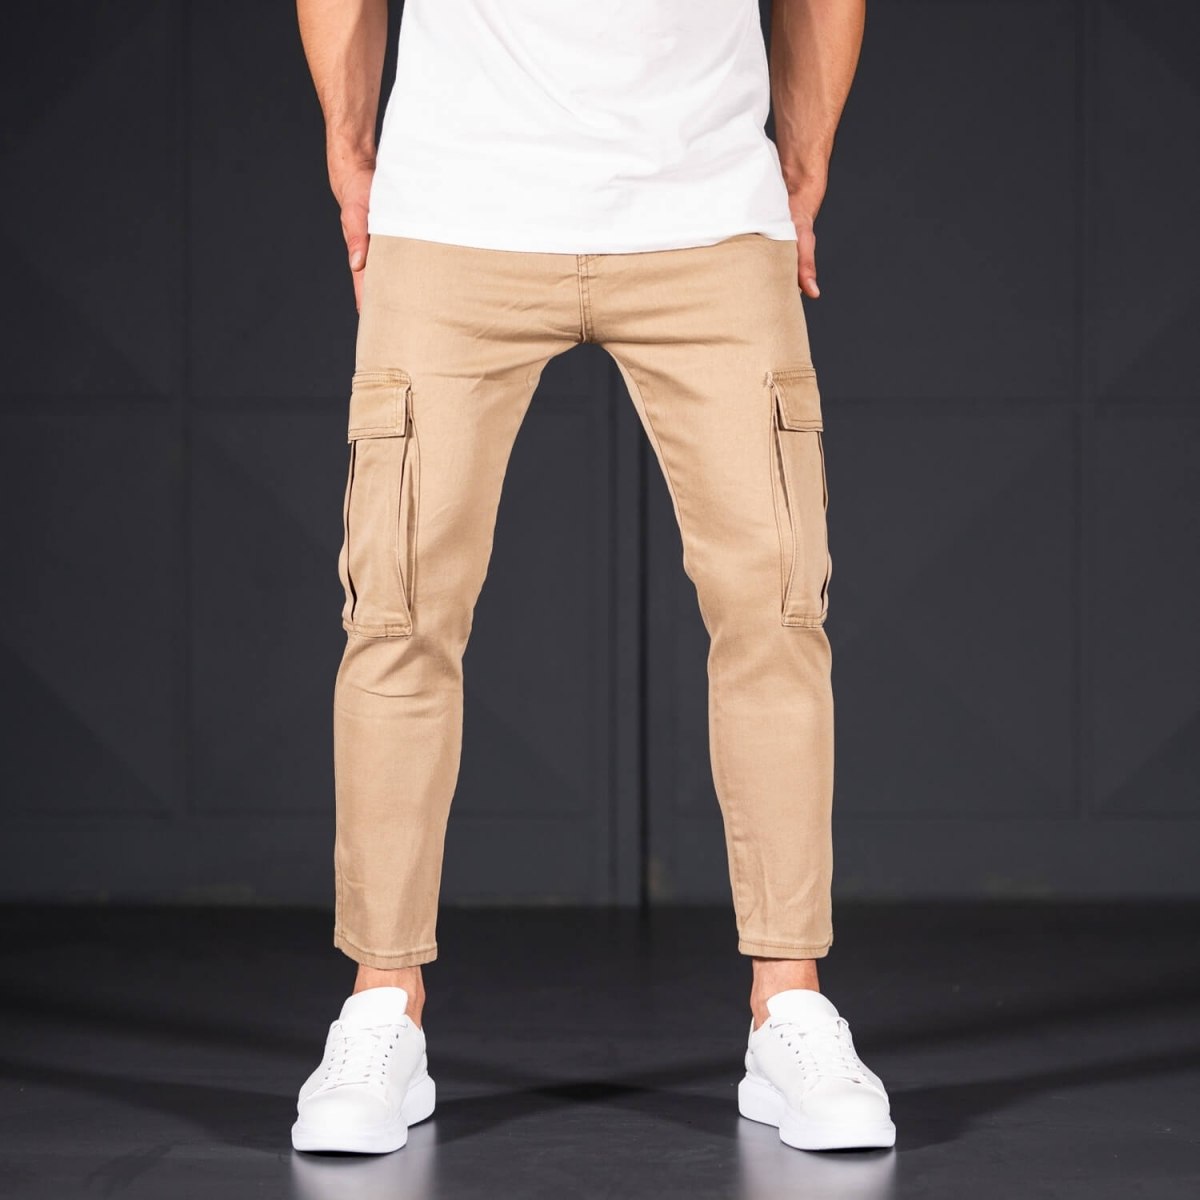 Men's Jeans with Pockets Style in Camel